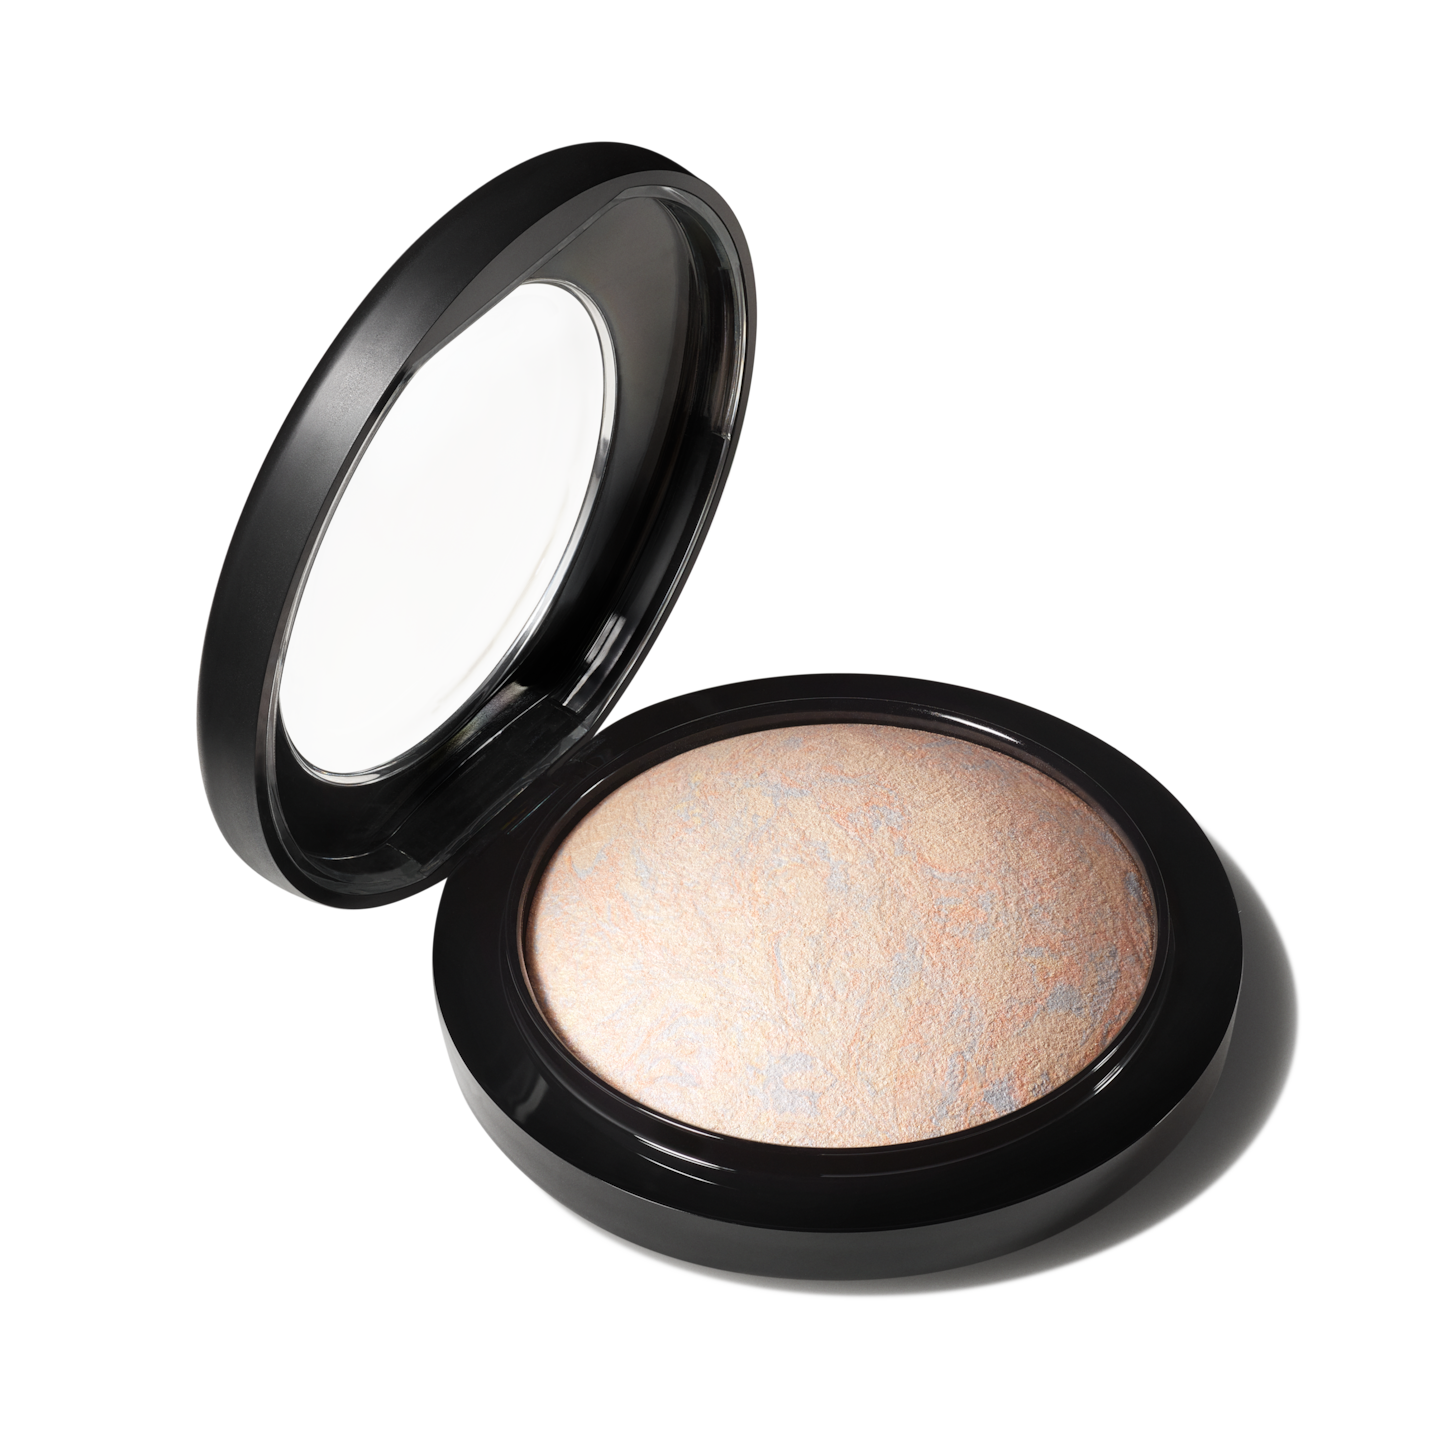 Mineralize Skinfinish Highlighting Powder | MAC MAC Cosmetics - Official Site